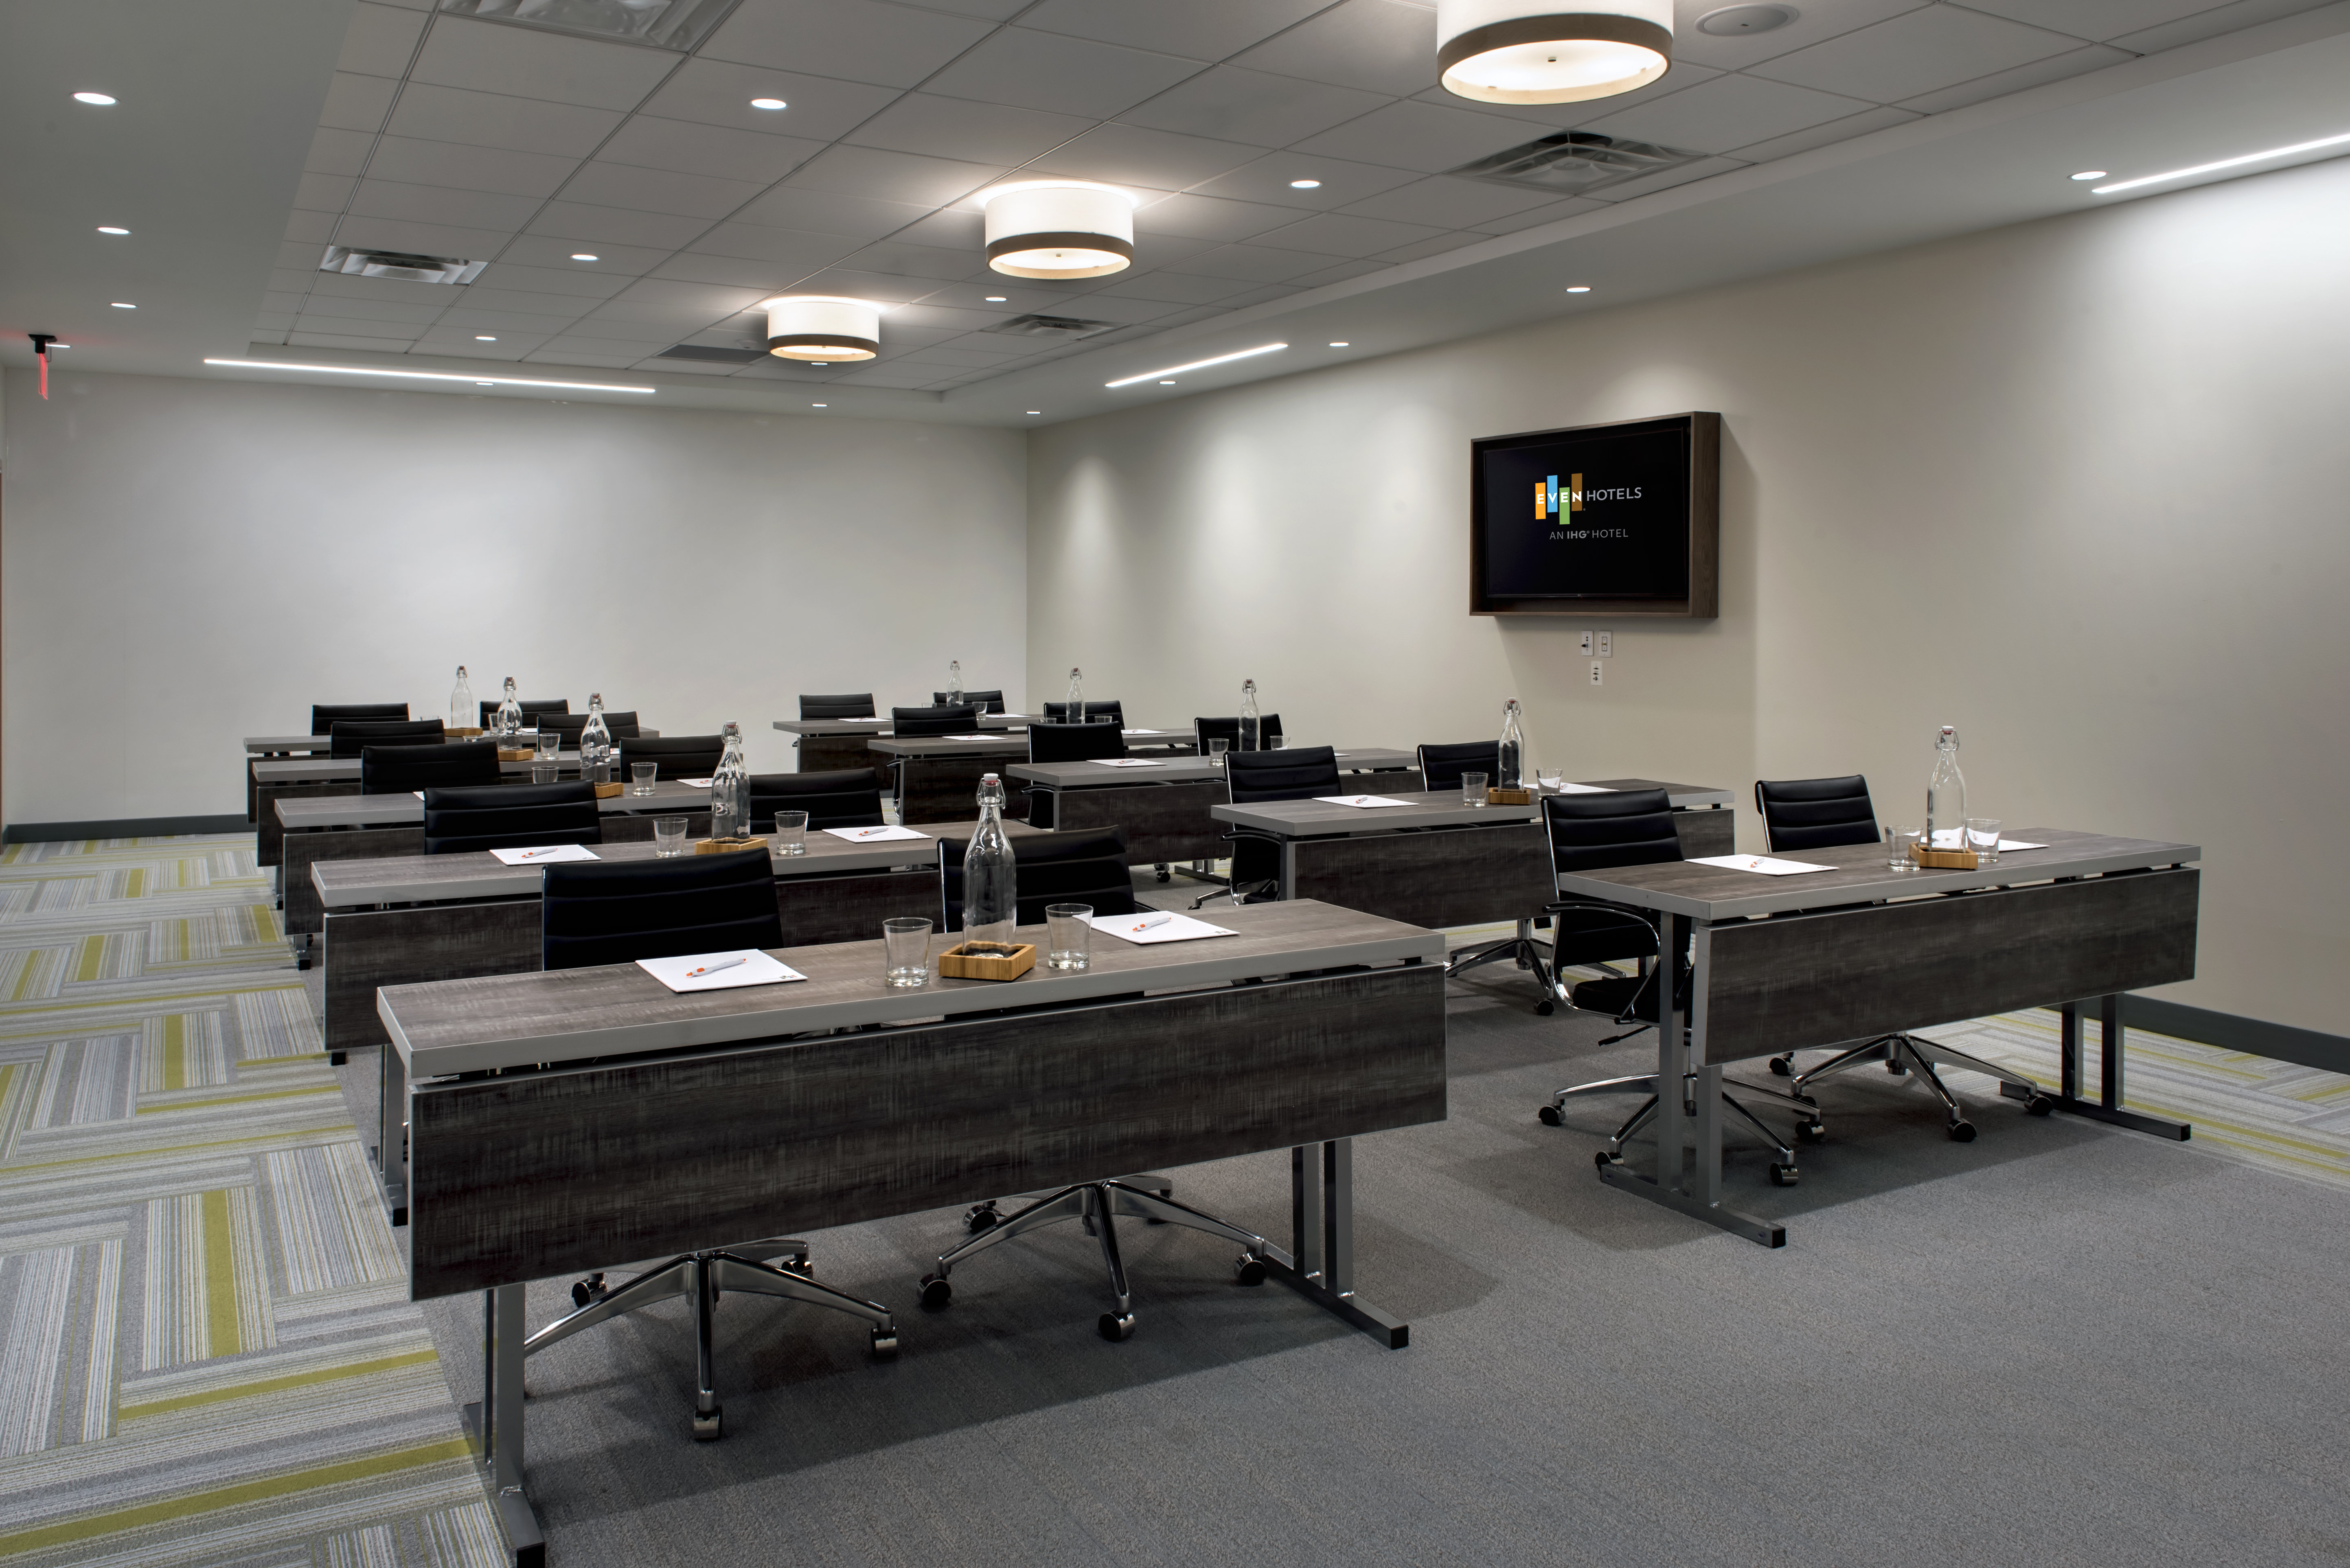 Our meeting space can be set up in a number of different ways.